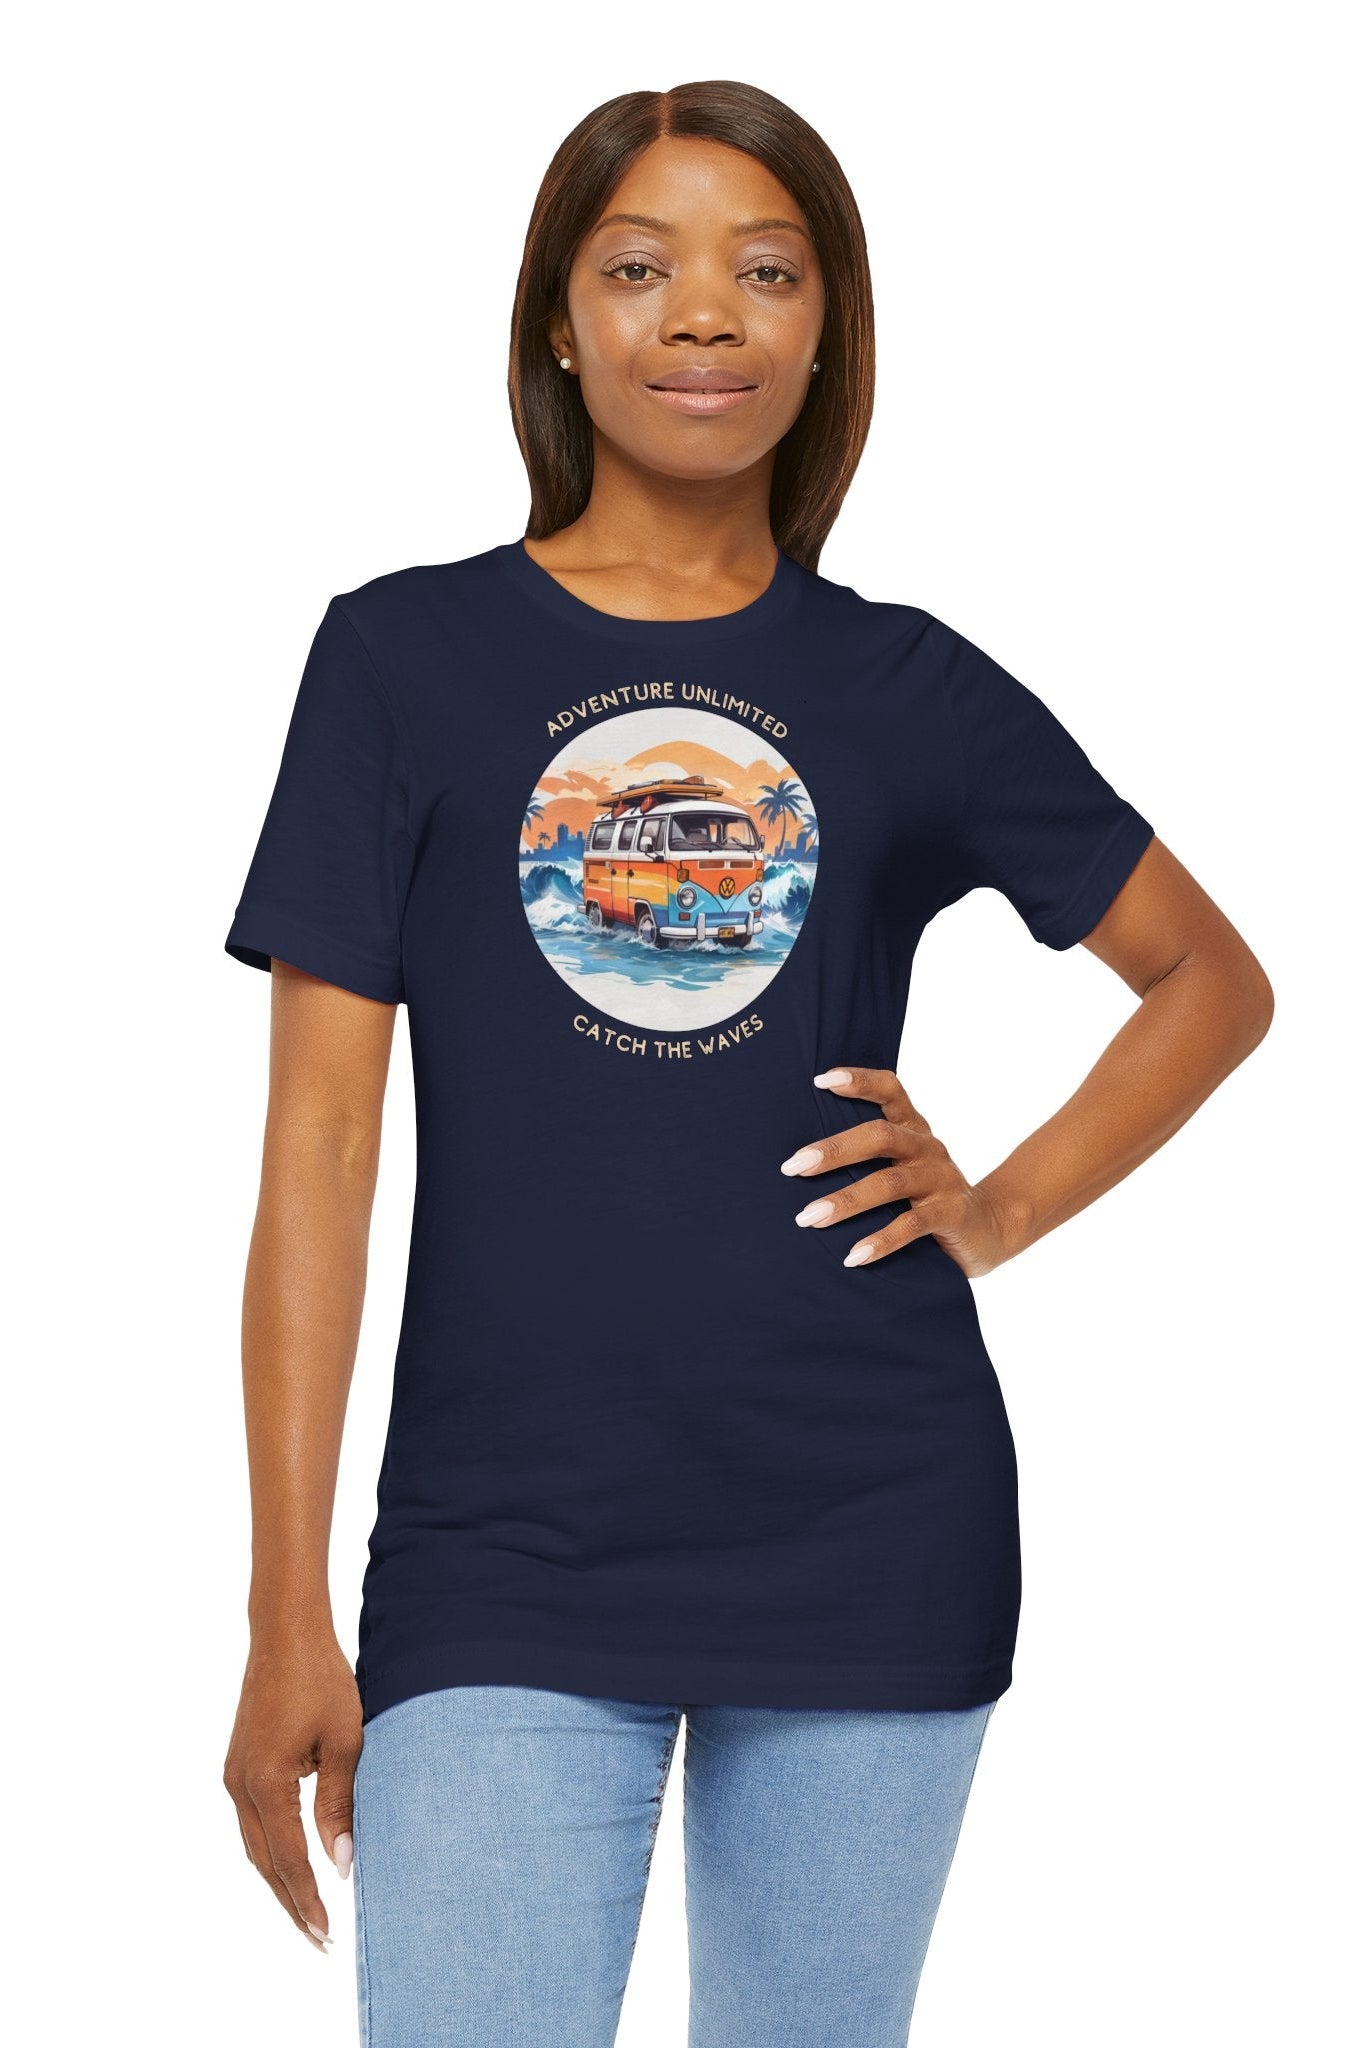 Bella & Canvas EU direct-to-garment printed navy t-shirt with boat in ocean design by Adventure Unlimited